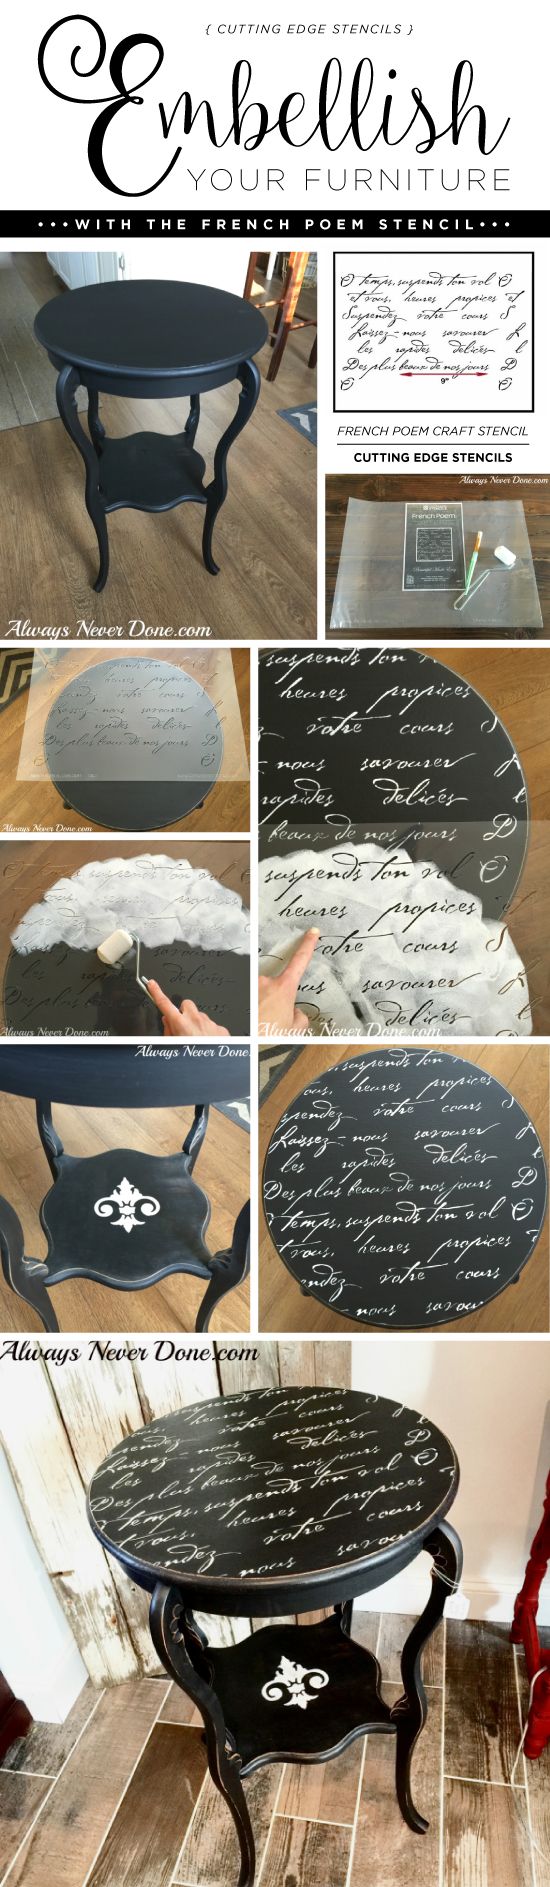 Cutting Edge Stencils shares a DIY side table makeover using the French Poem Cra...